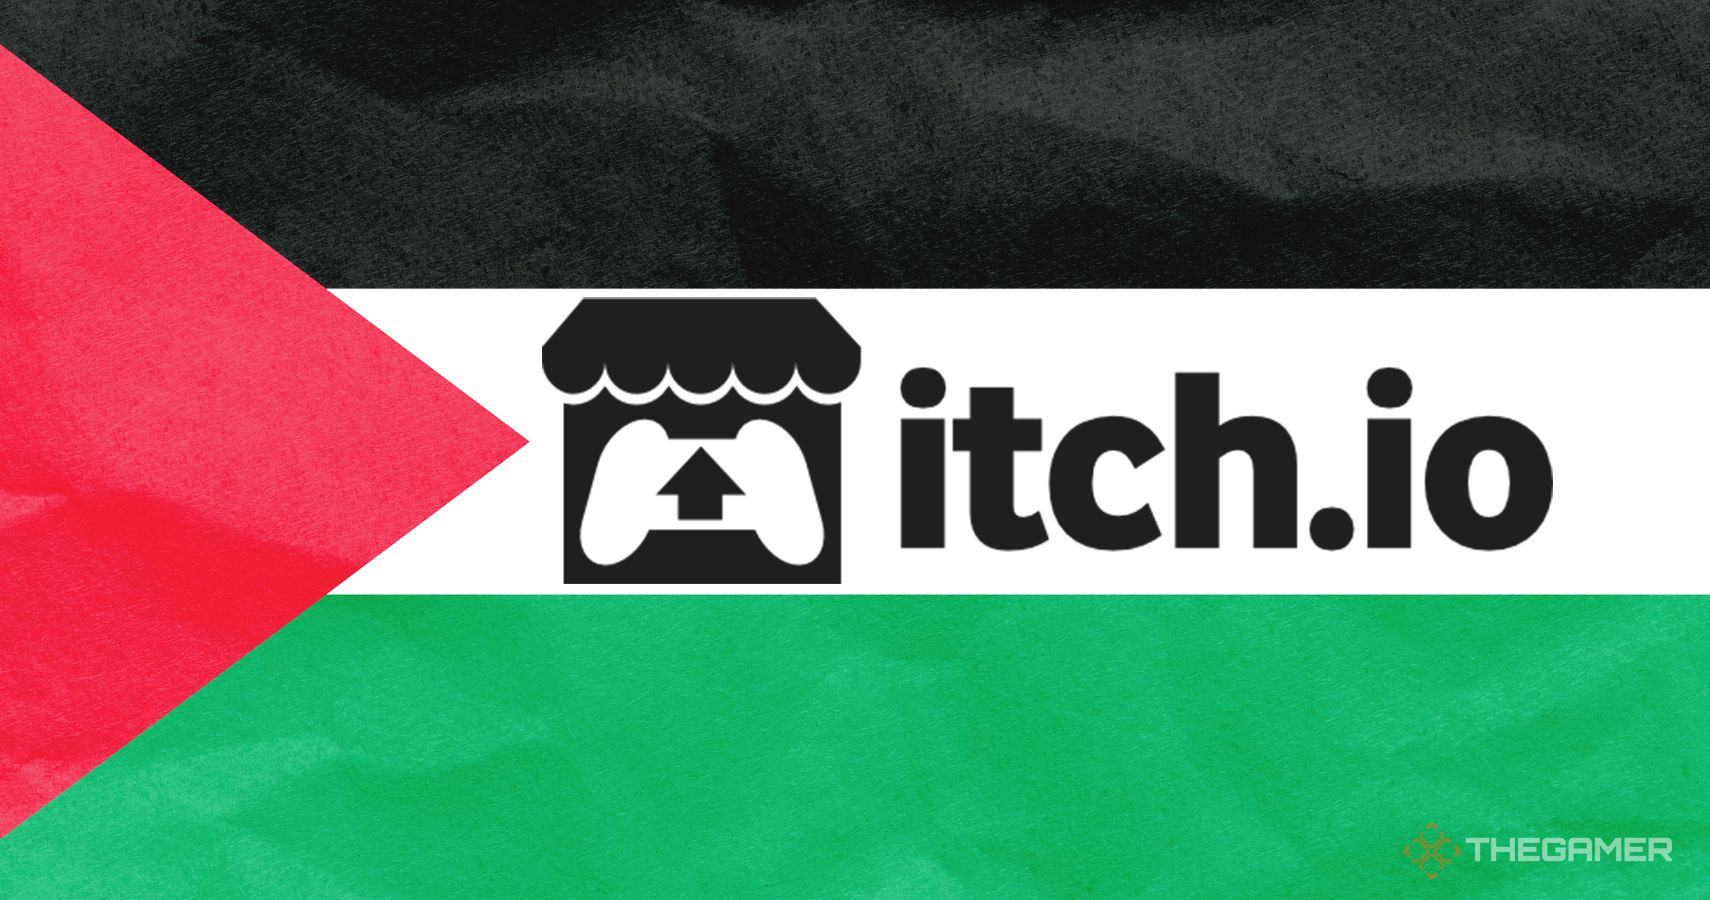 the itch.io logo on the flag of palestine